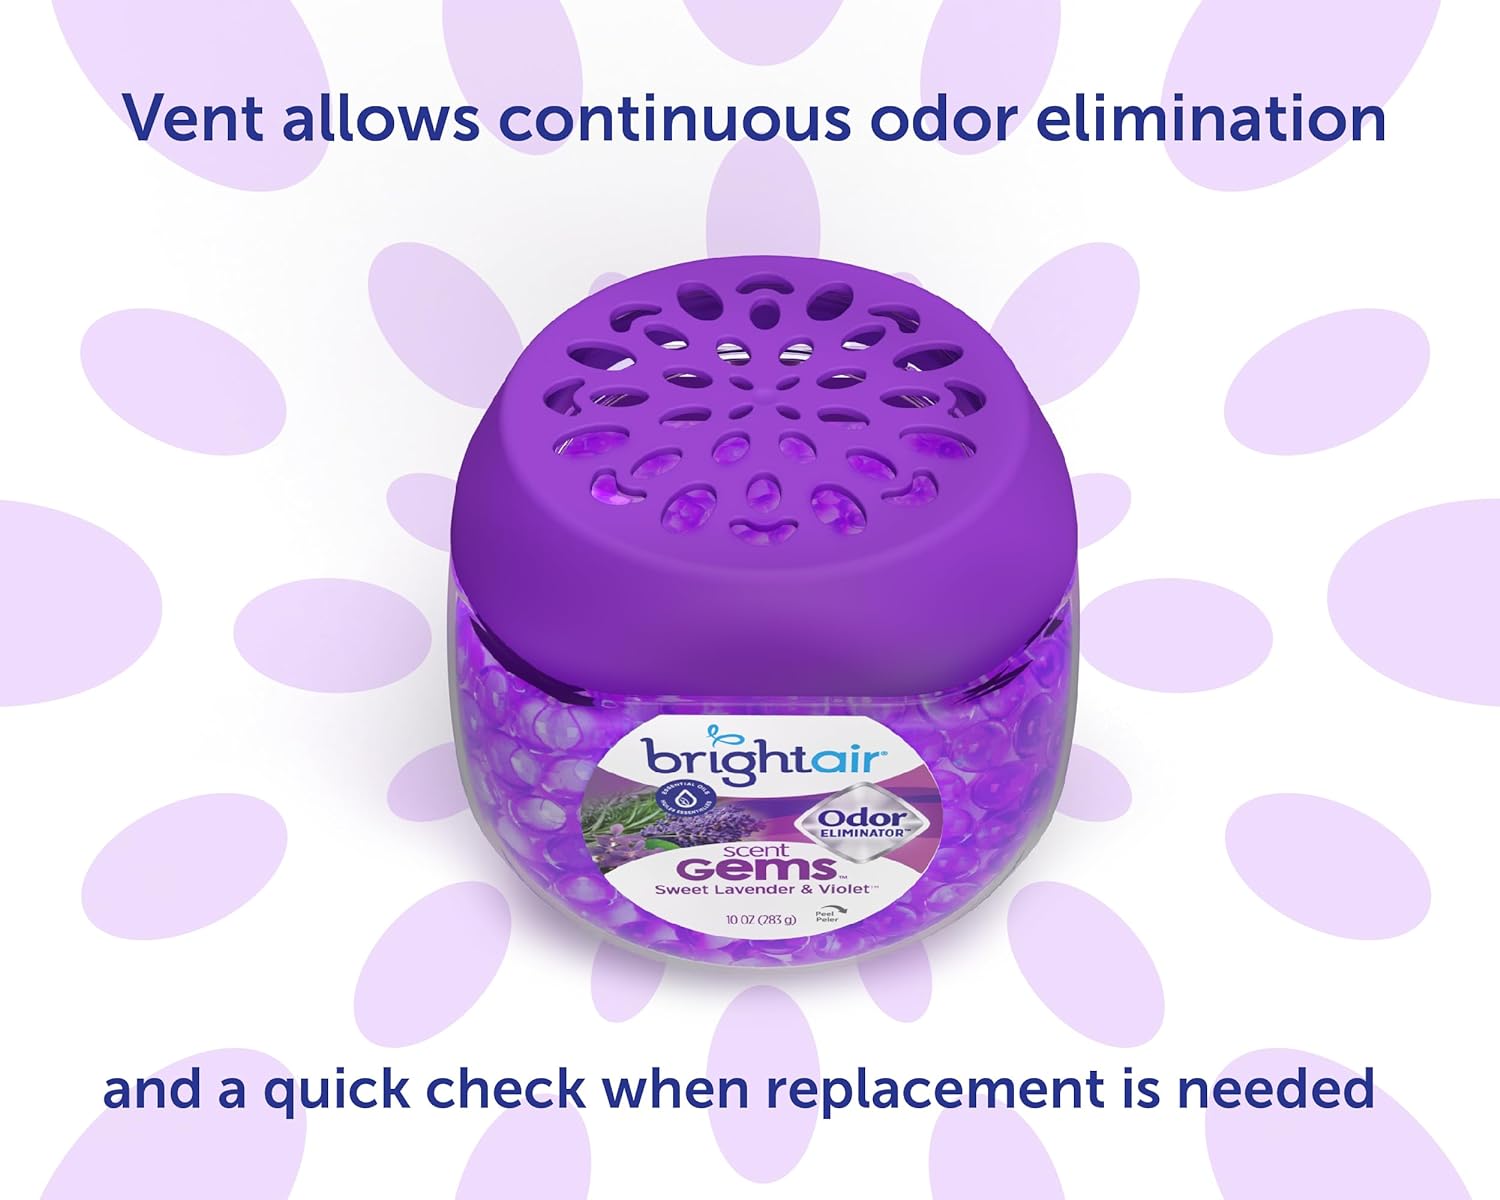 Bright Air Scent Gems, For Small to Medium-Size Spaces, Sweet Lavender & Violet Scent, 12 oz. Each, Case of 6, Odor Eliminator & Air Freshener, Natural Essential Oils, Lasts Up to 45 Days Each : Health & Household